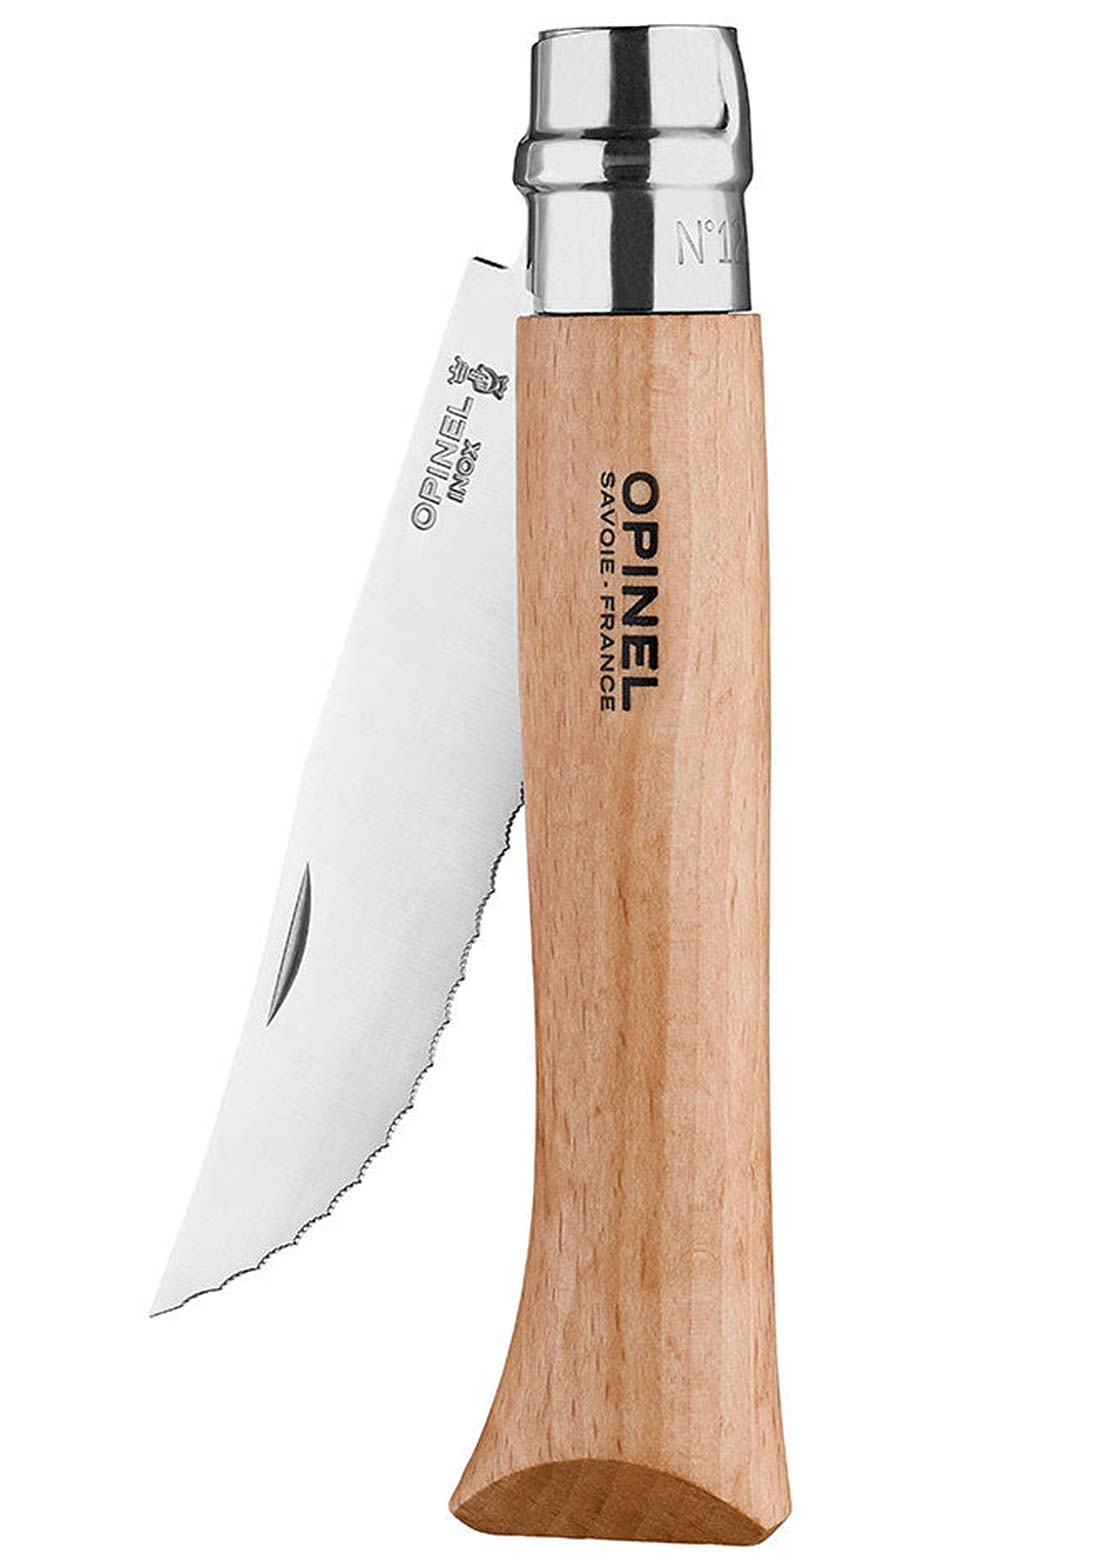 Opinel No12 Serrated Knife